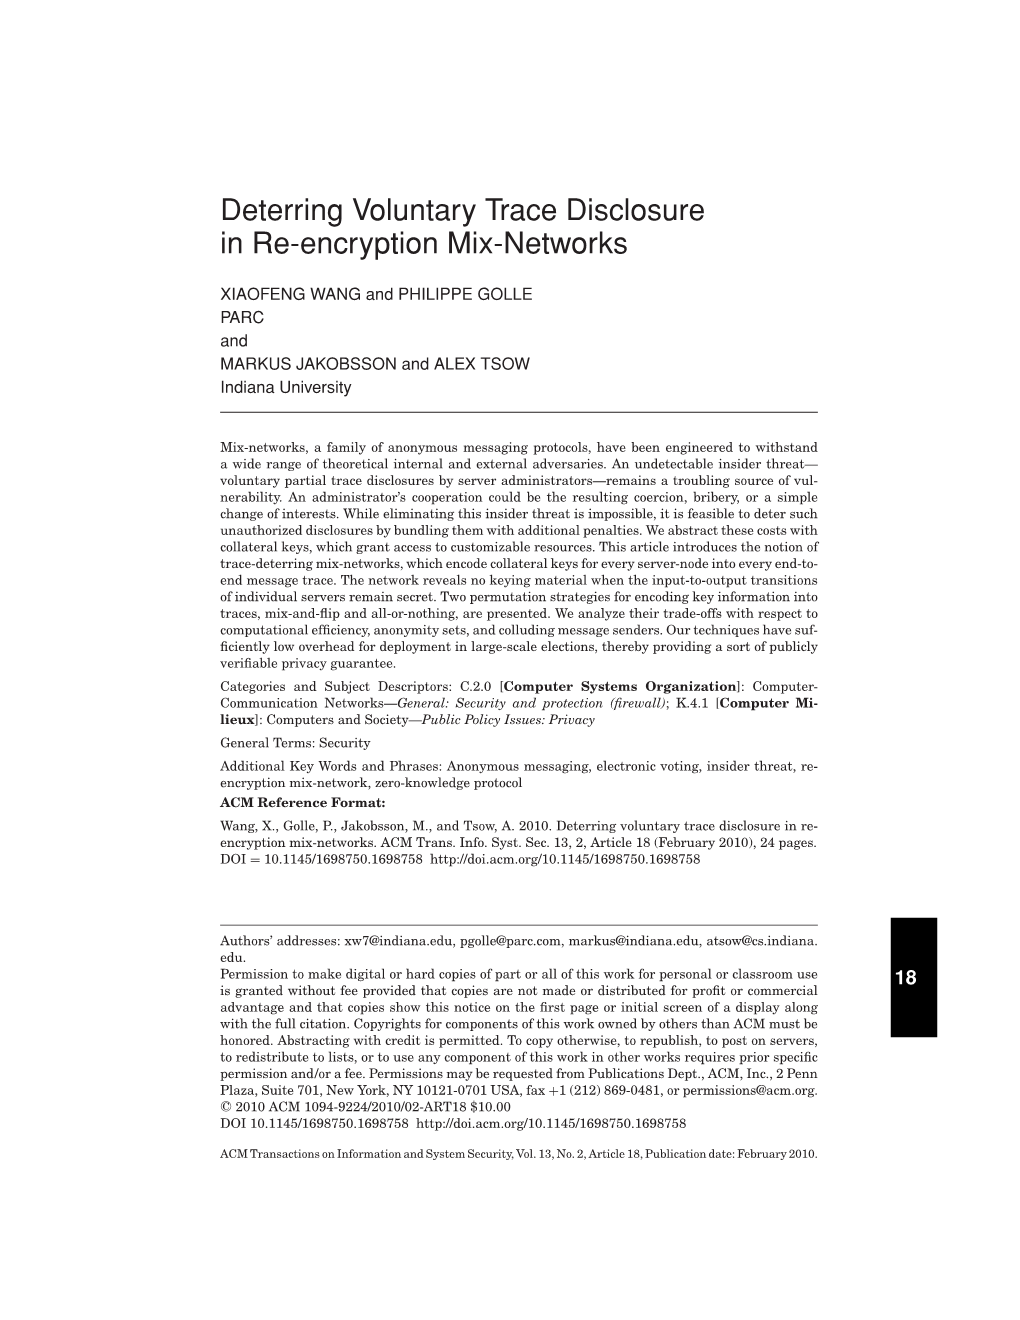 Deterring Voluntary Trace Disclosure in Re-Encryption Mix-Networks